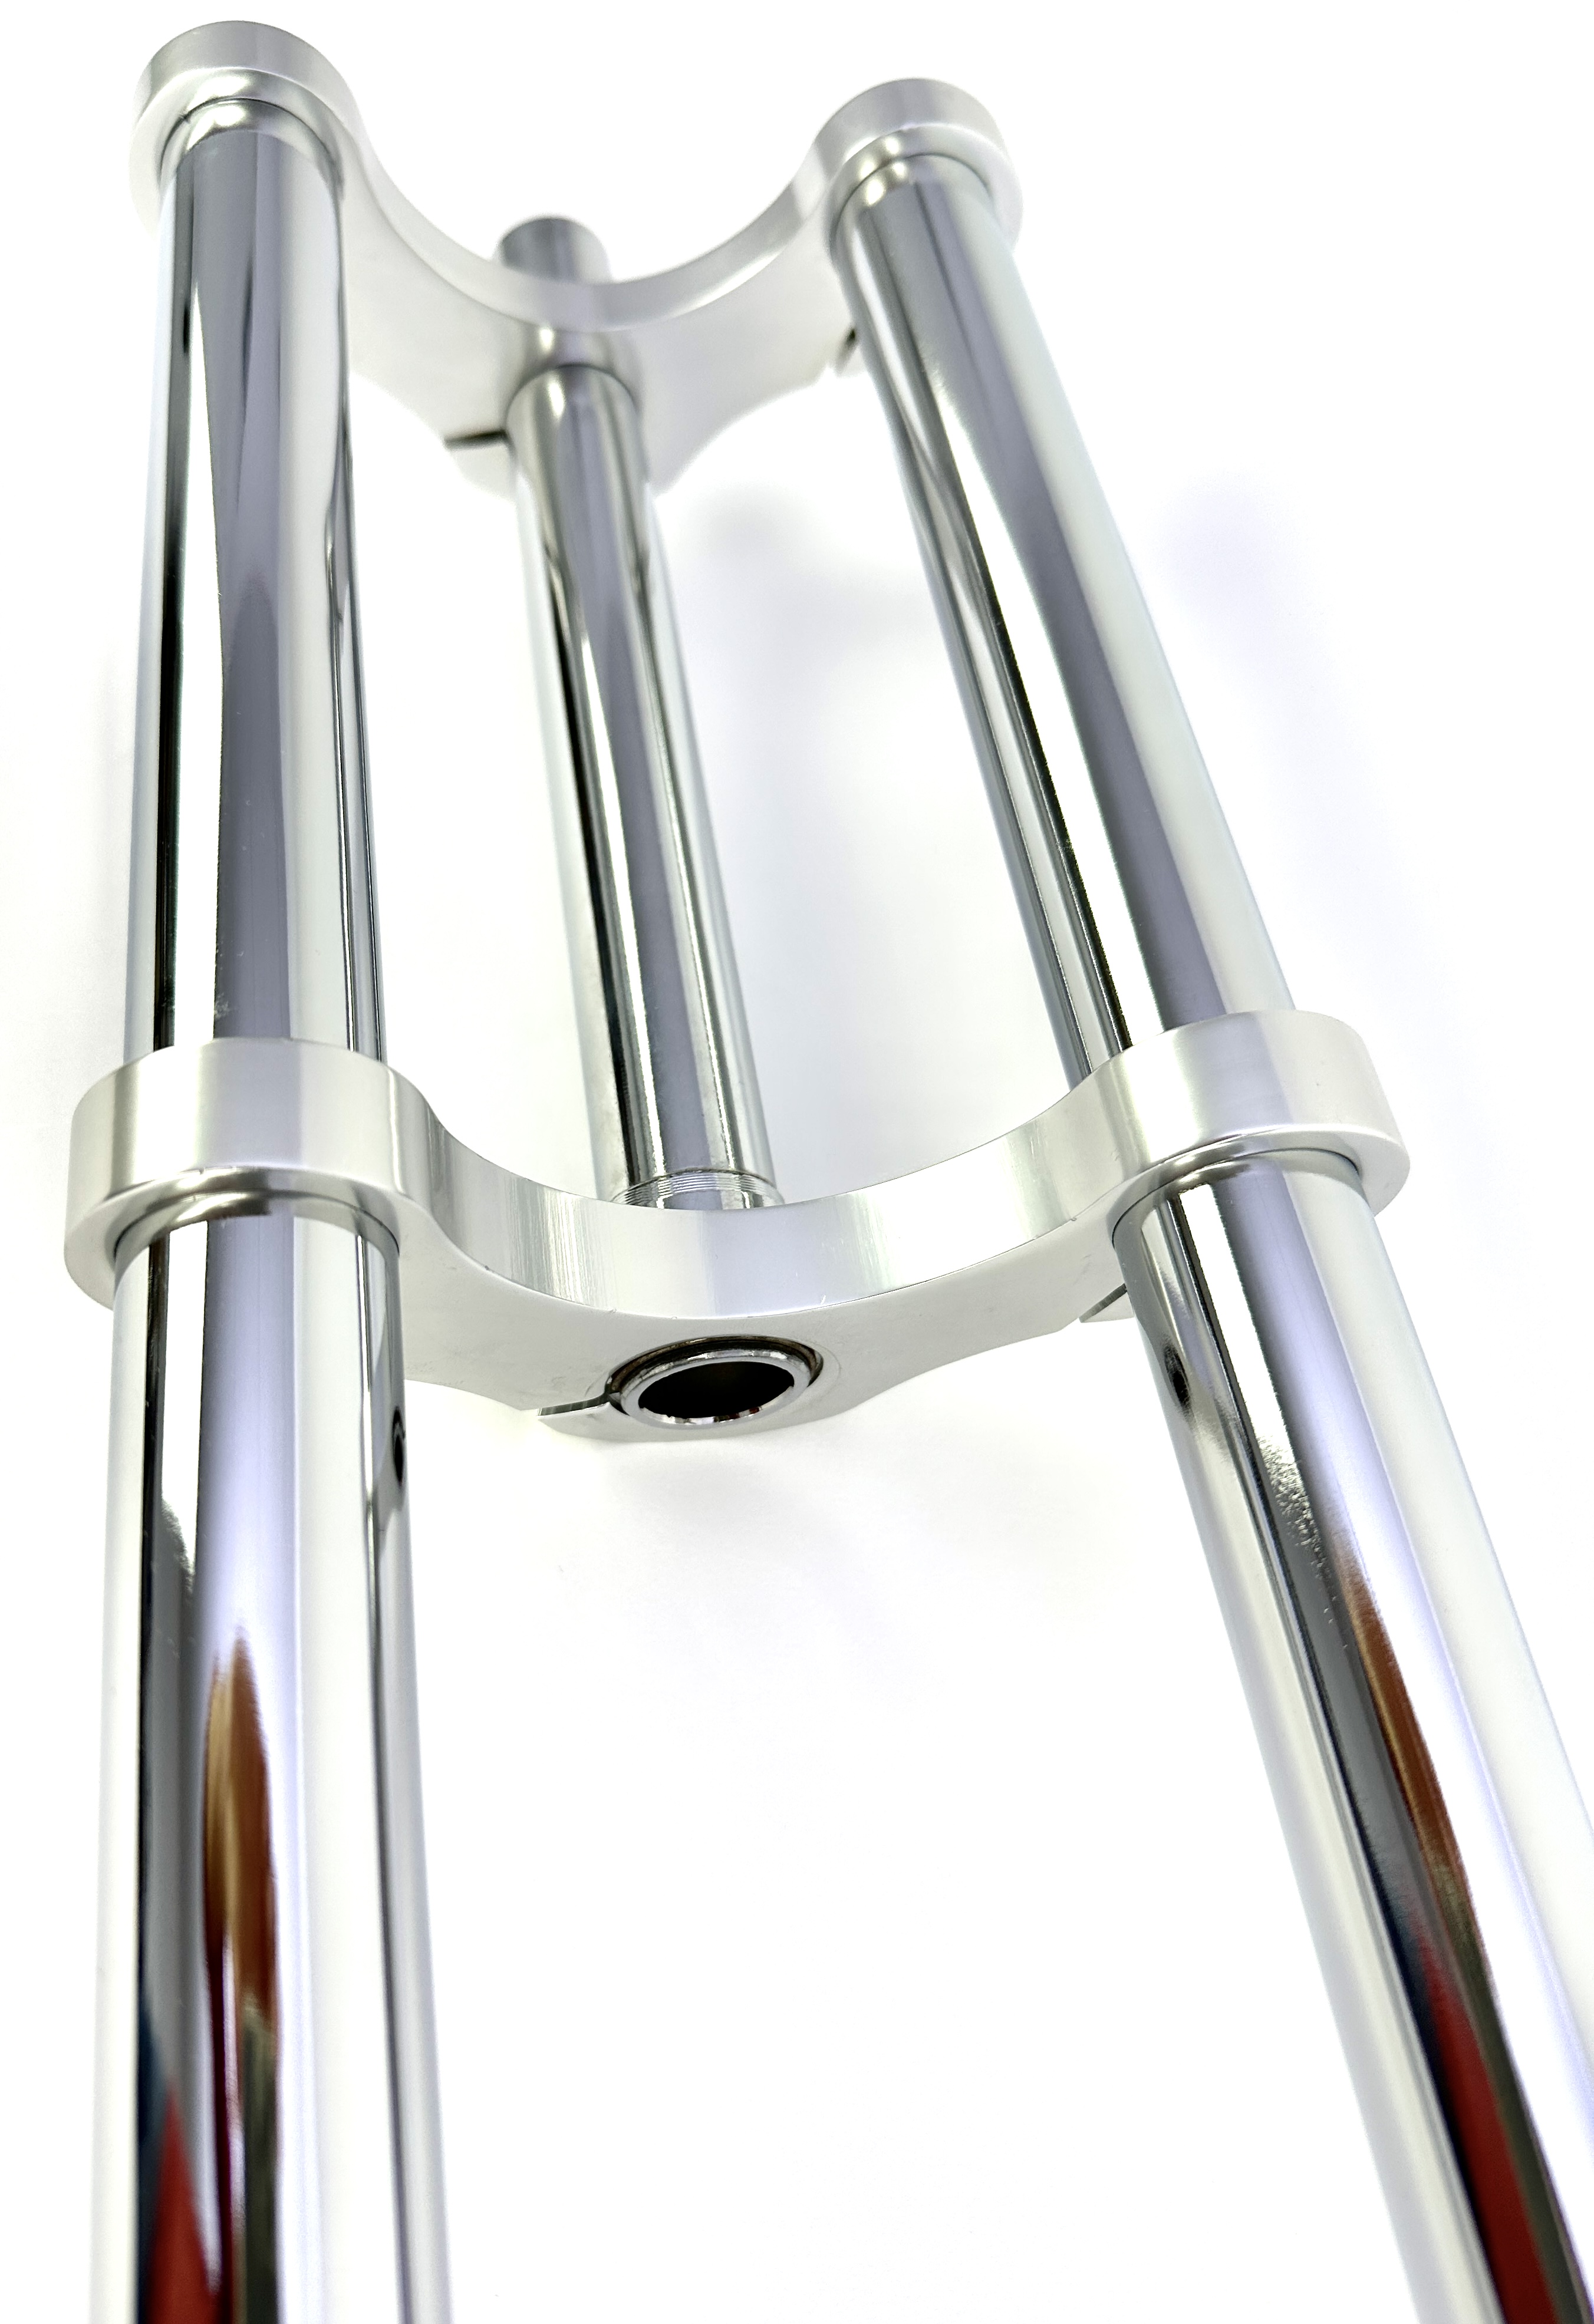 7-Double crown fork 750 mm chrome plated 1 1/8 inch shaft